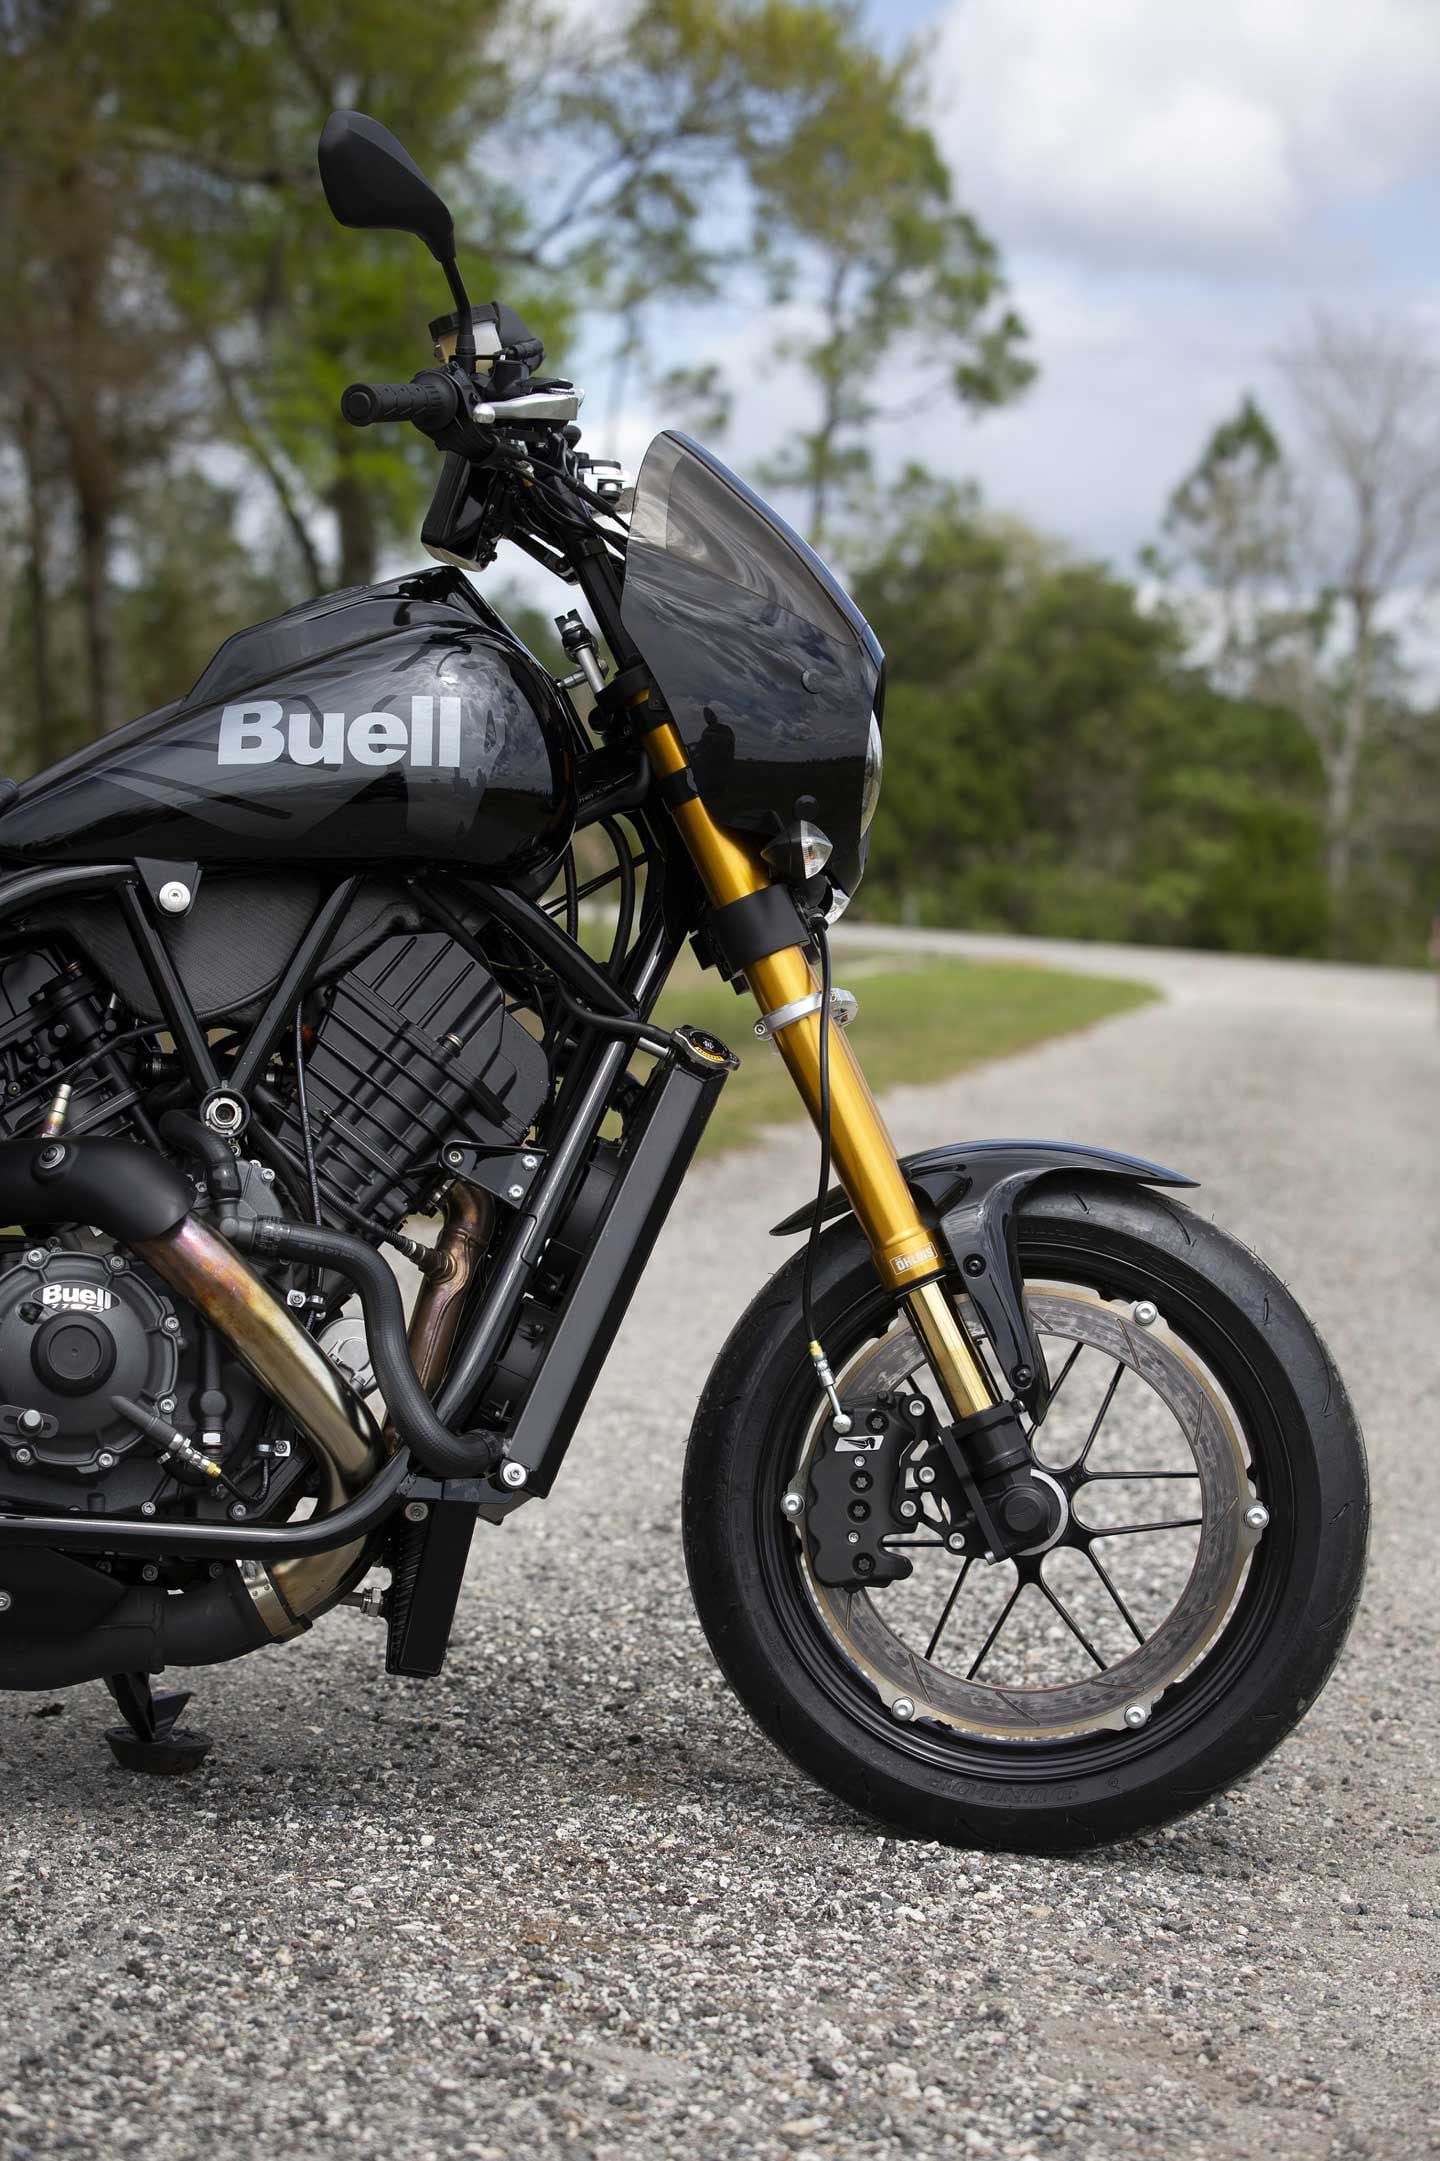 The 17-inch EBR wheels shod with sticky Dunlop rubber are fitted with Buell’s signature perimeter braking system with 386mm rotor clamped by an eight-piston caliper. We had Öhlins suspension on our testbike; Buell says that’s subject to change.